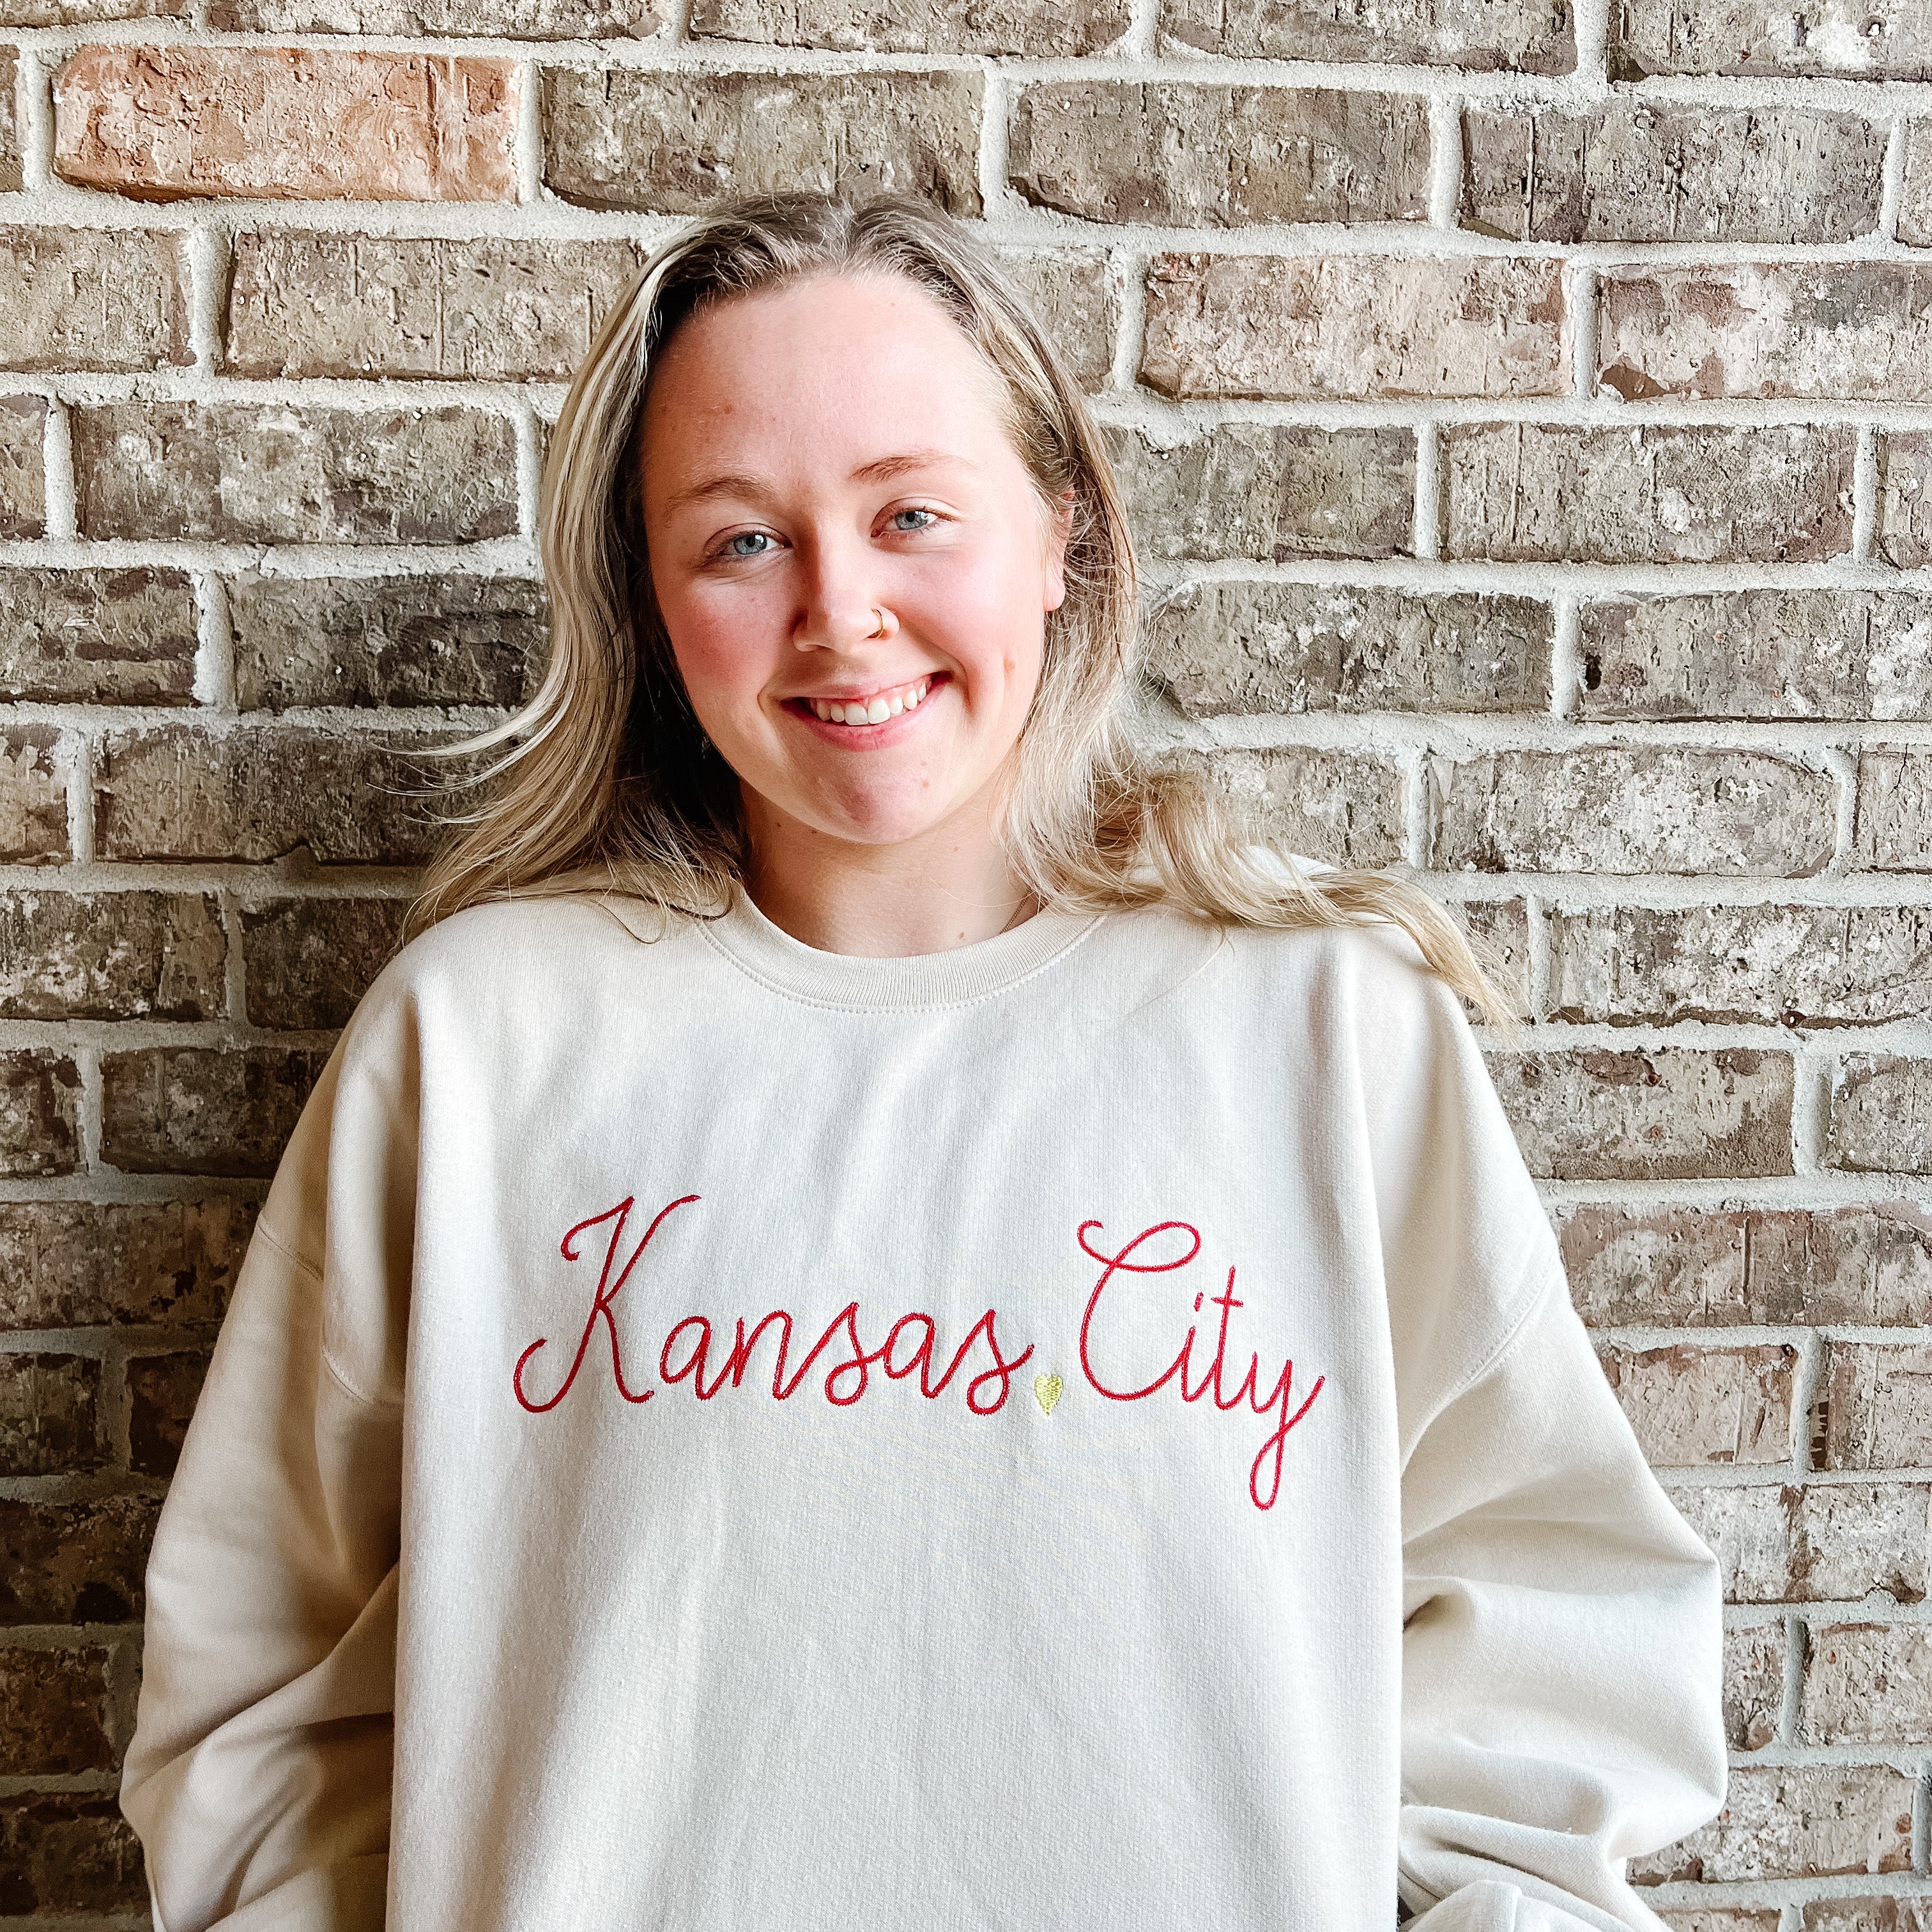 LE Custom Embroidered “YOUR” City Sweatshirts